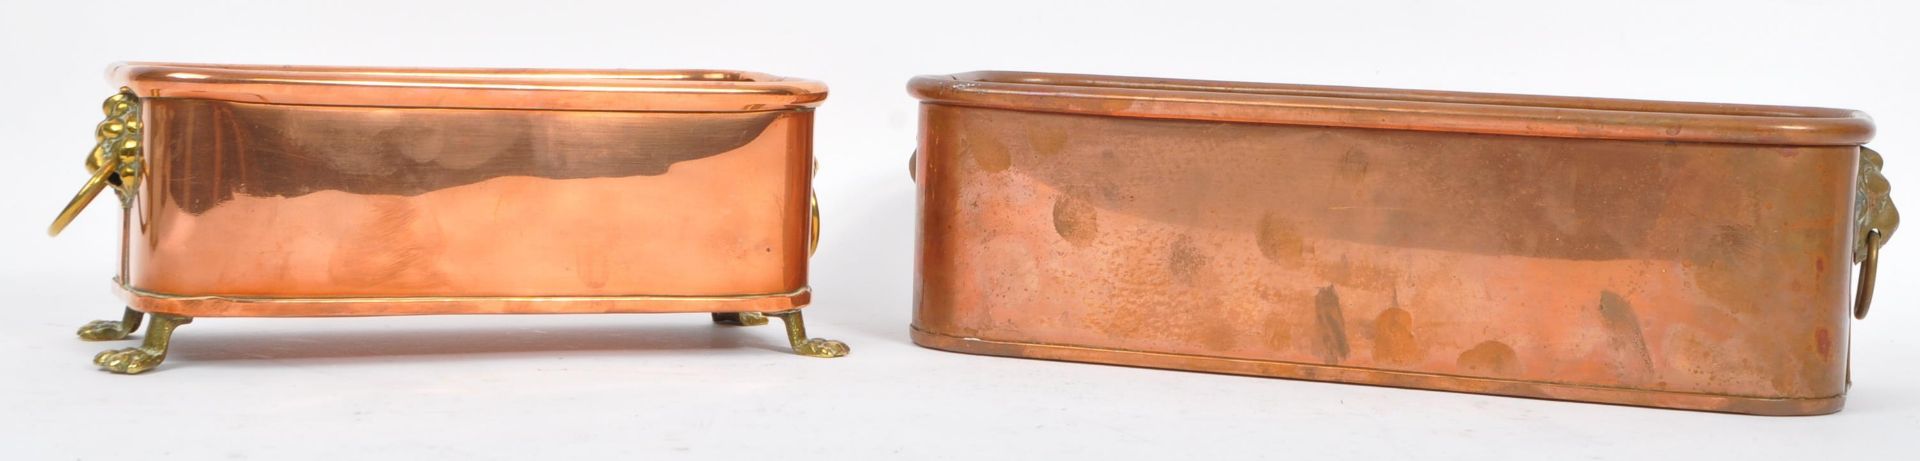 TWO EARLY 20TH CENTURY COPPER RECTANGULAR WINDOW PLANTERS